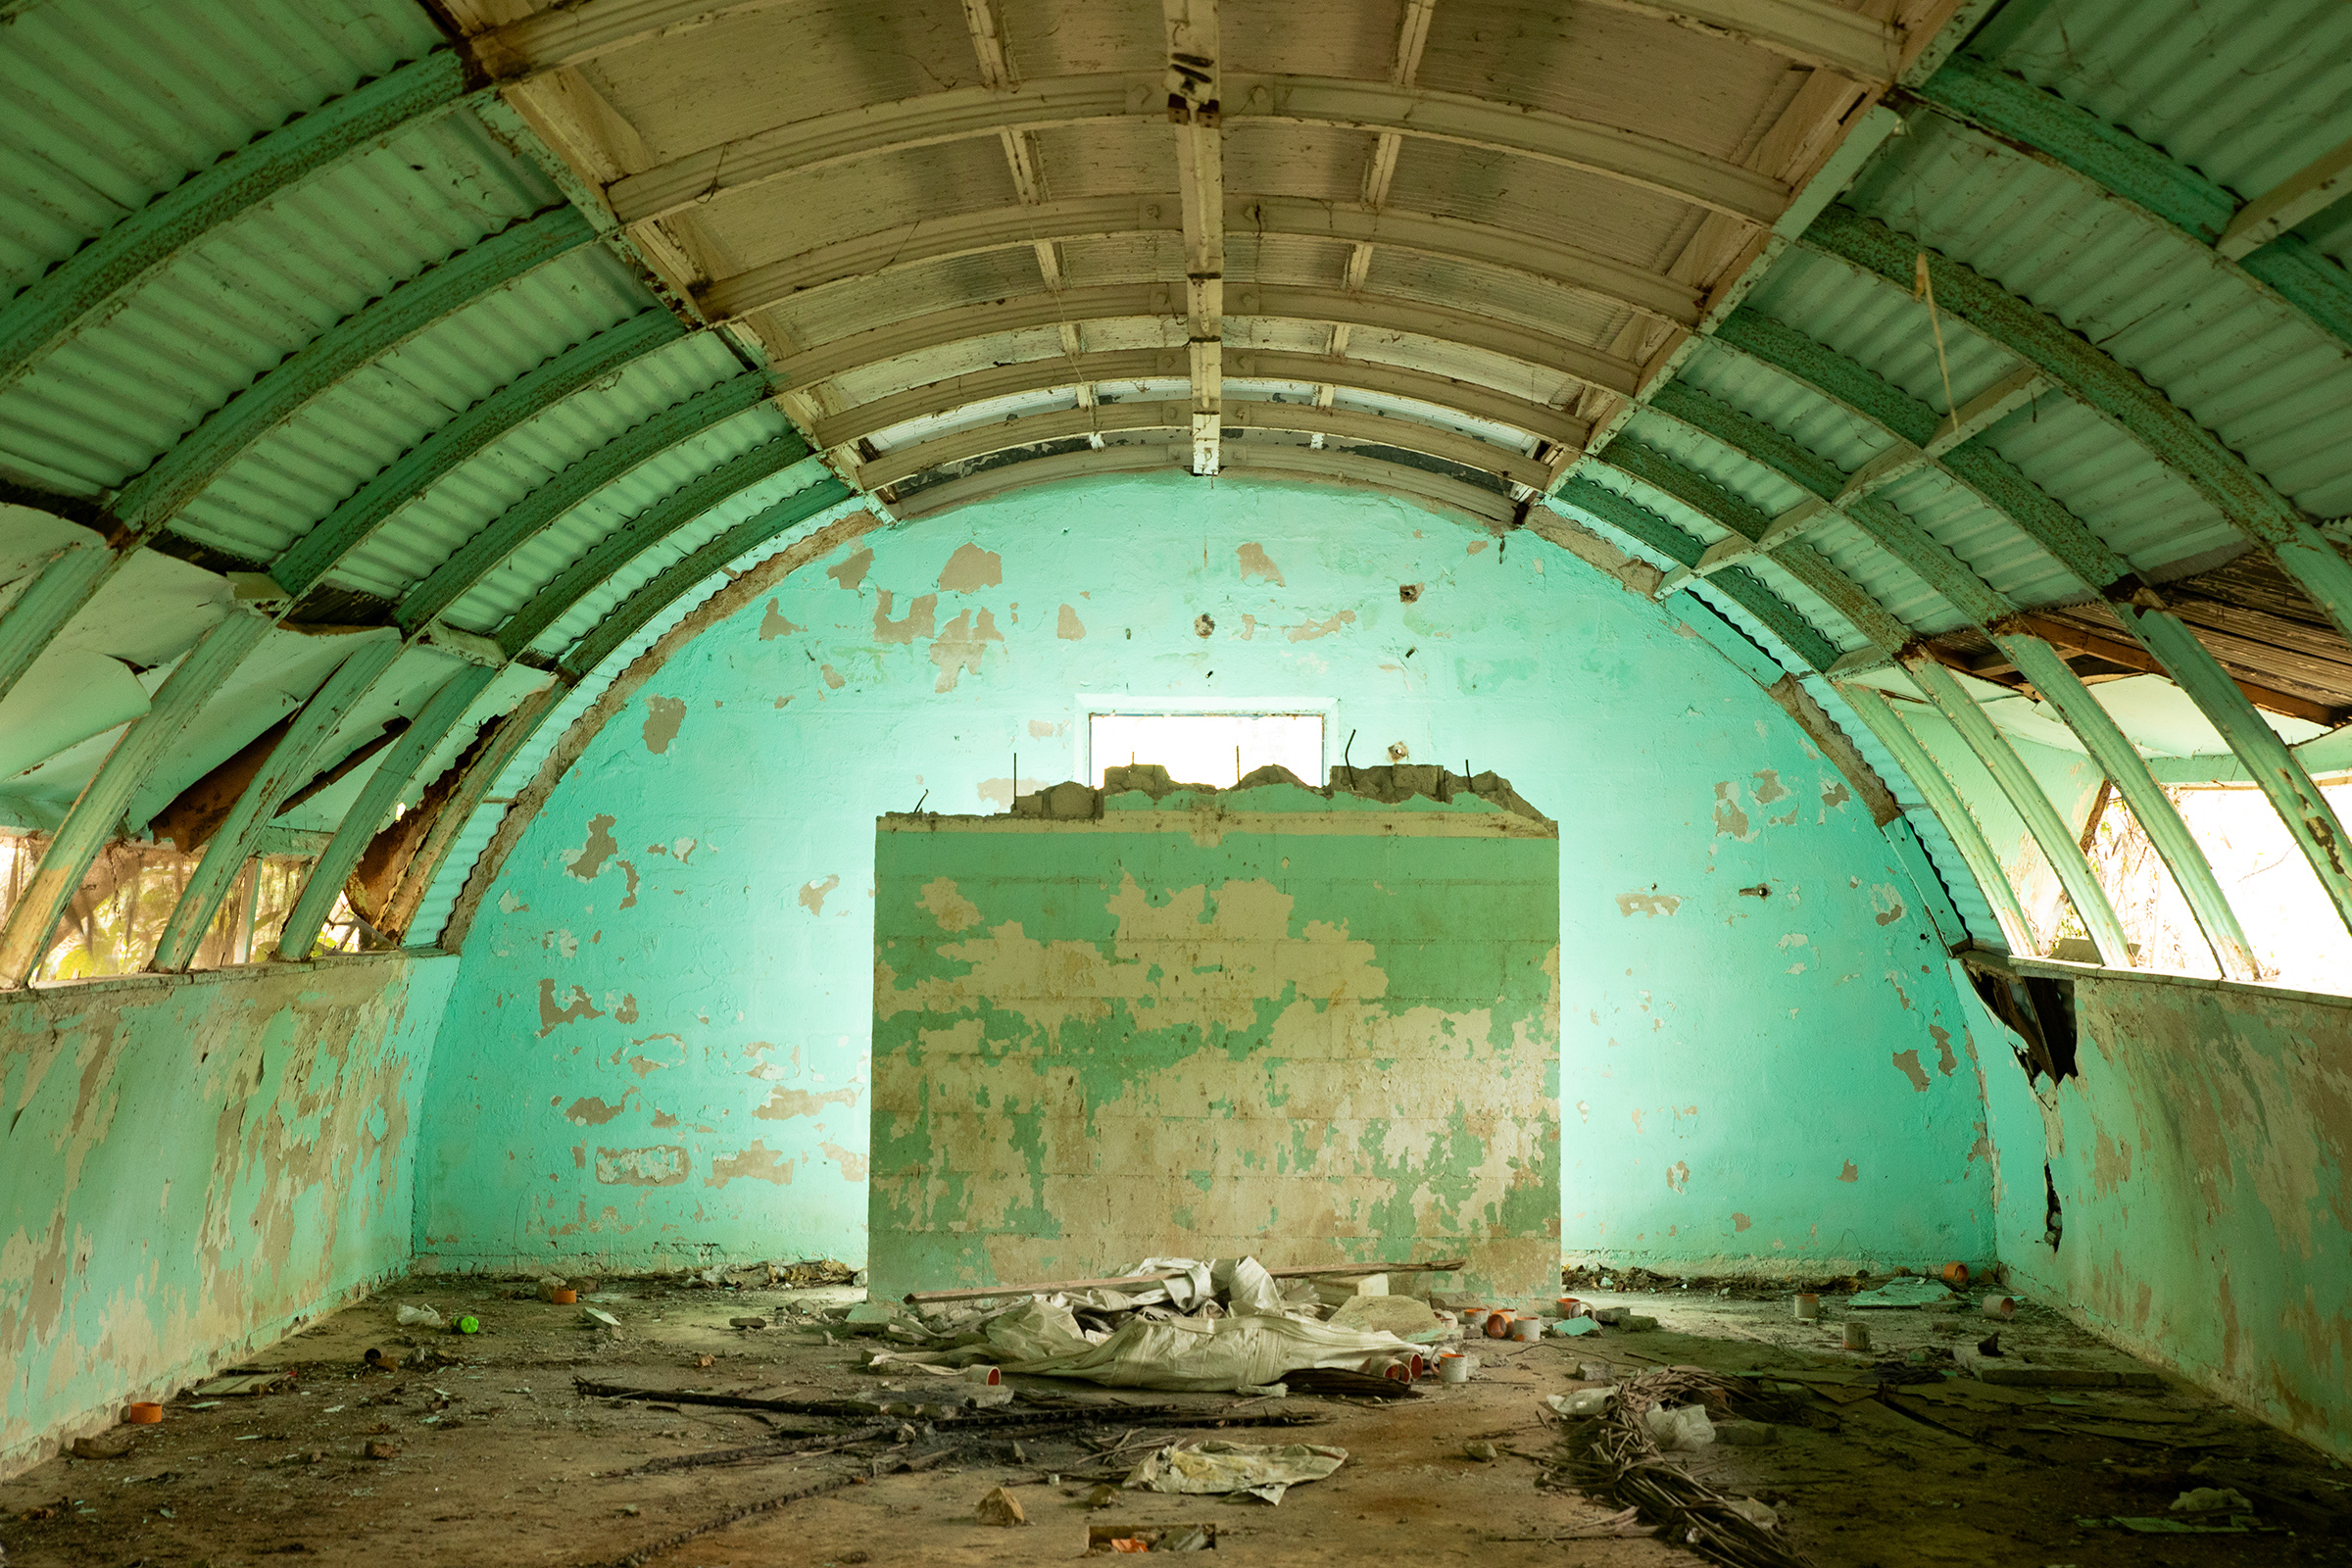 Inside one of the Quonset huts, which were used as barracks before being abandoned by the U.S. military, in Subic Bay. (Geric Cruz for TIME)